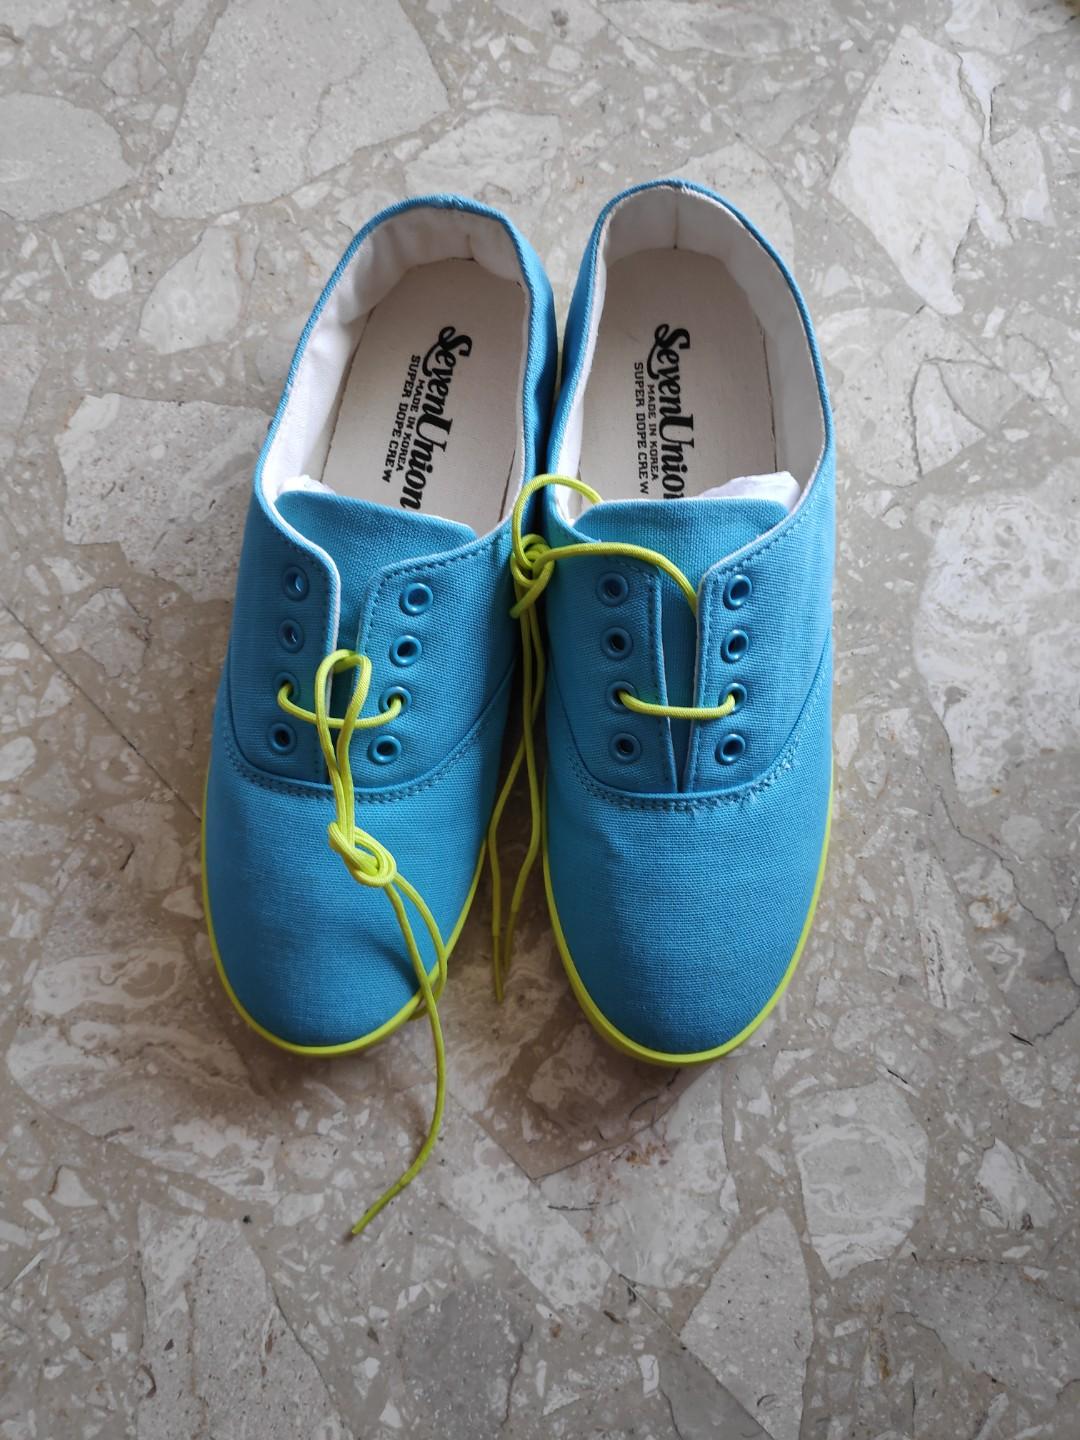 lime green and blue sneakers